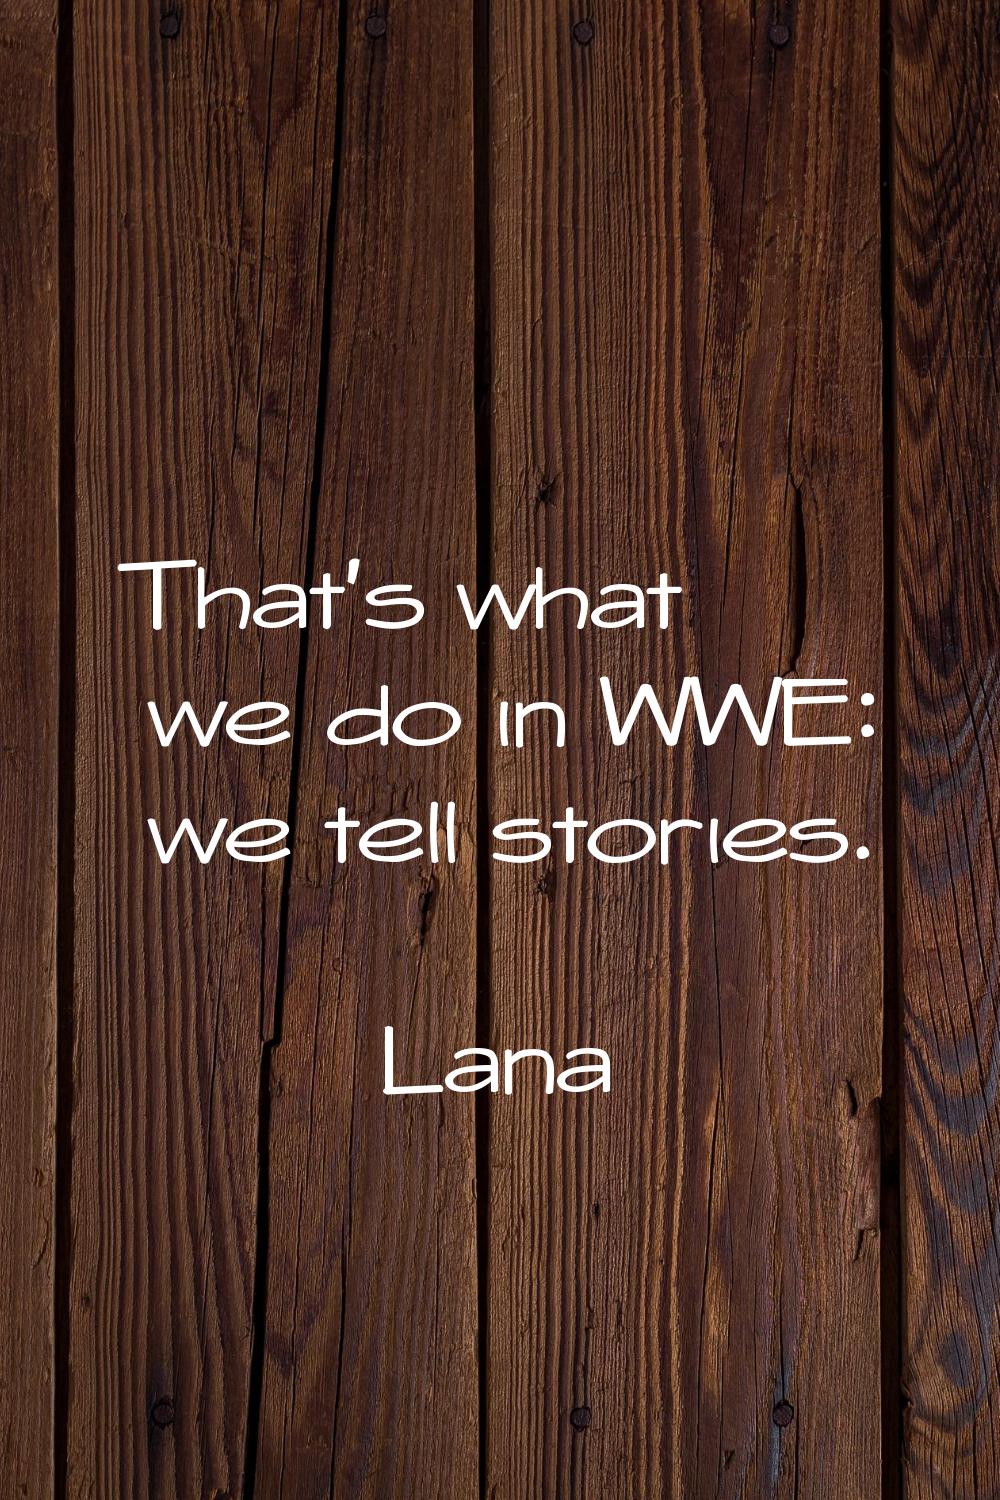 That's what we do in WWE: we tell stories.